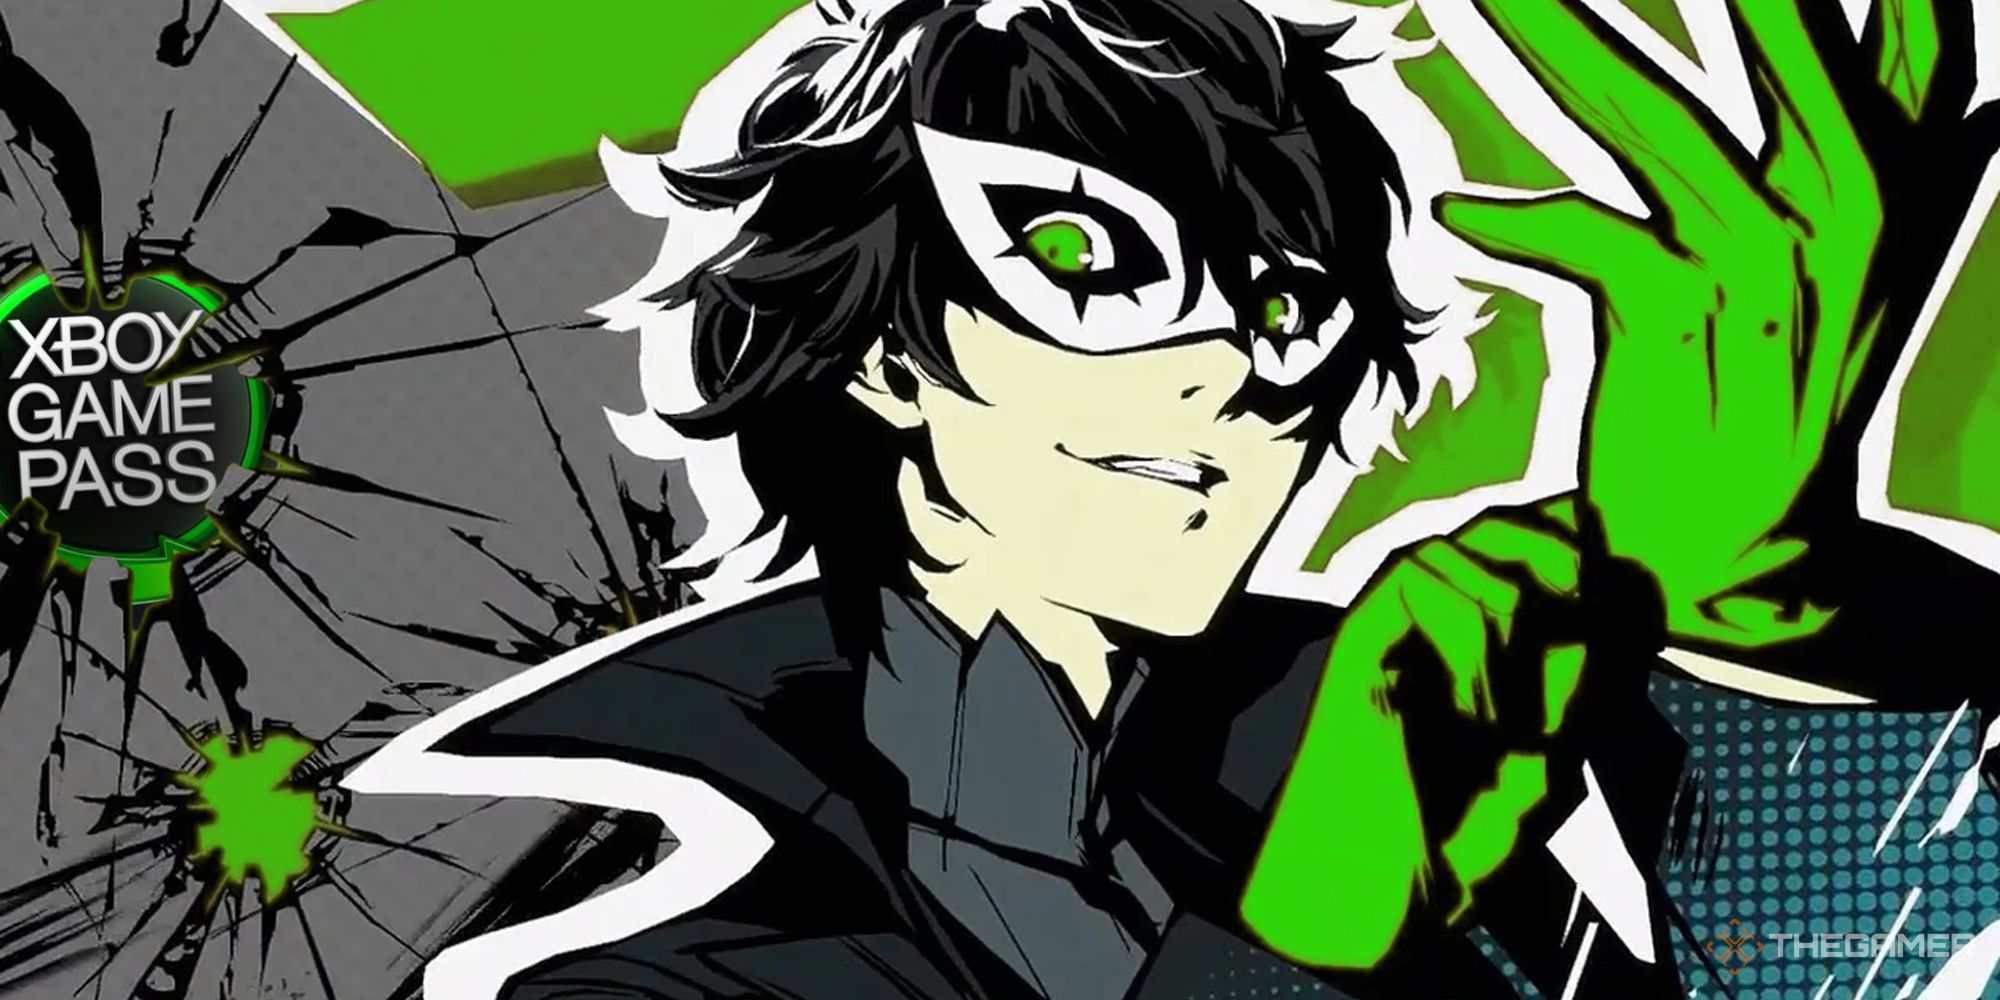 Xbox Game Pass Adds Persona 5 Royal, Amnesia, and More